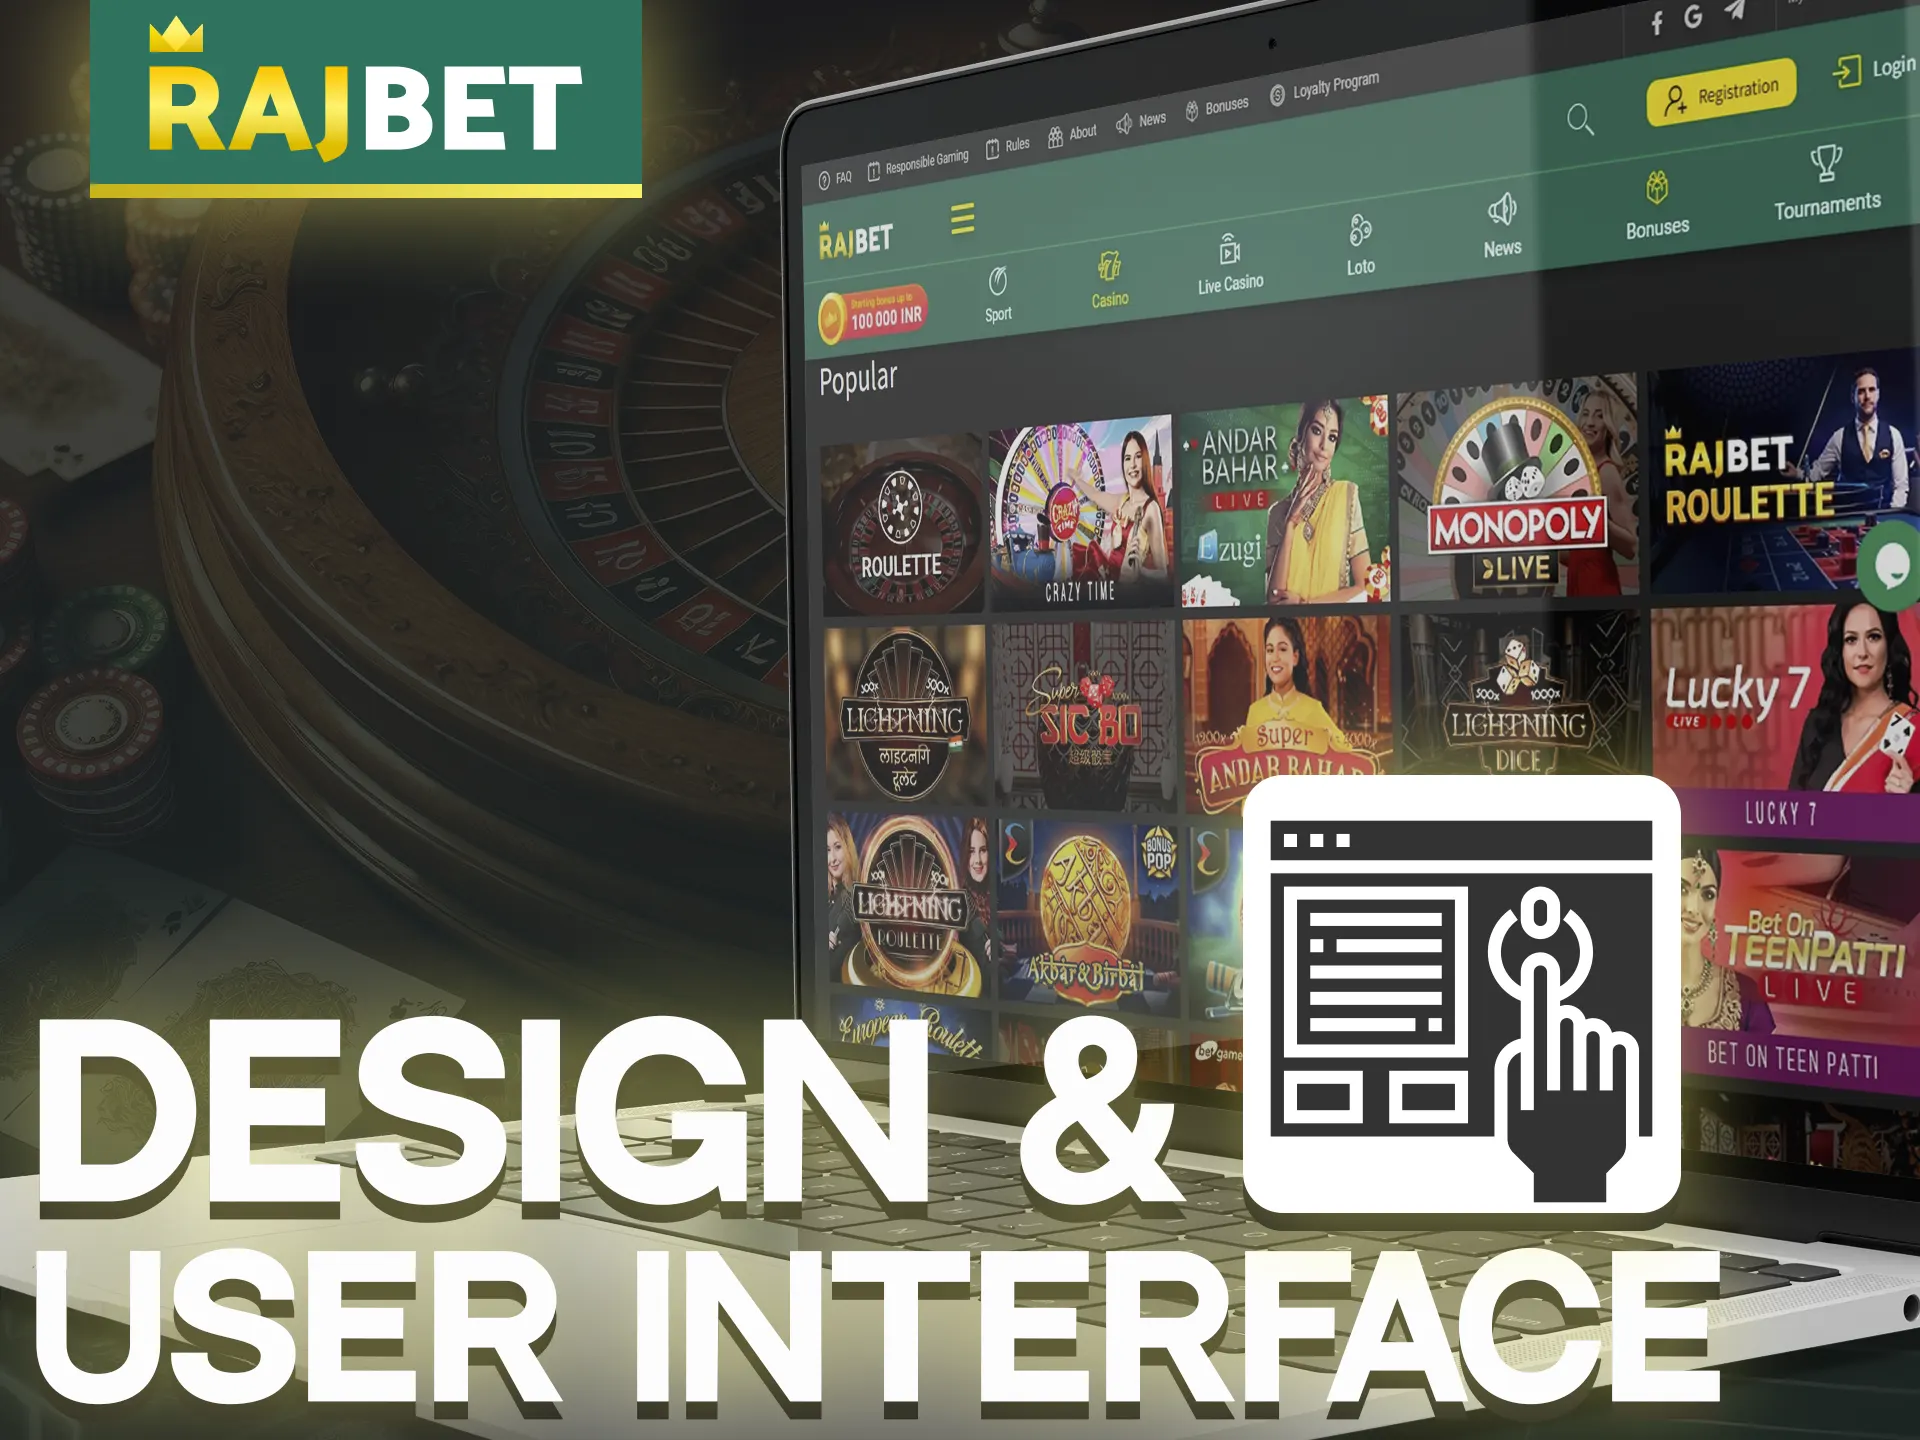 The modern design of Rajbet's website and mobile app provides a stimulating gameplay experience for consumers.